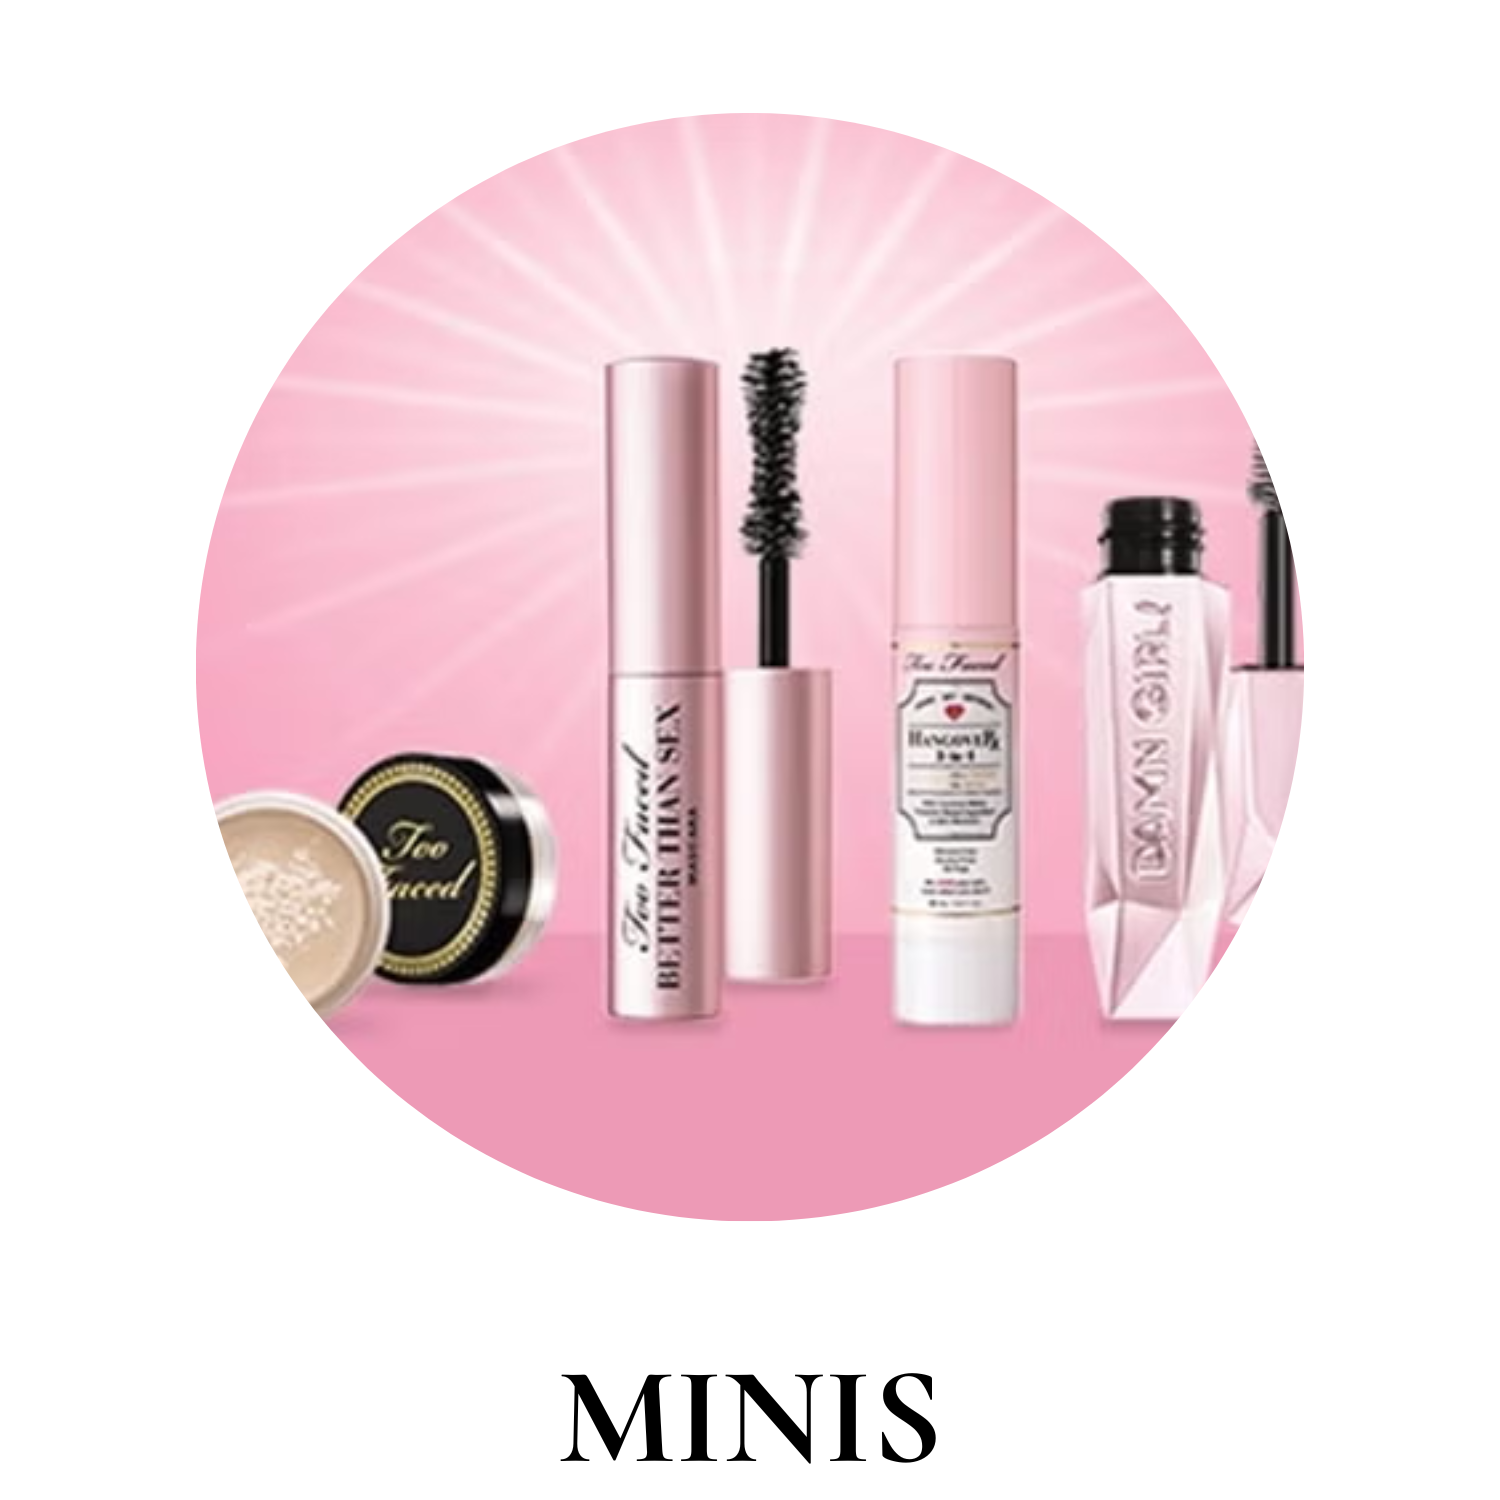 SHOP TOO FACED BY CATEGORY